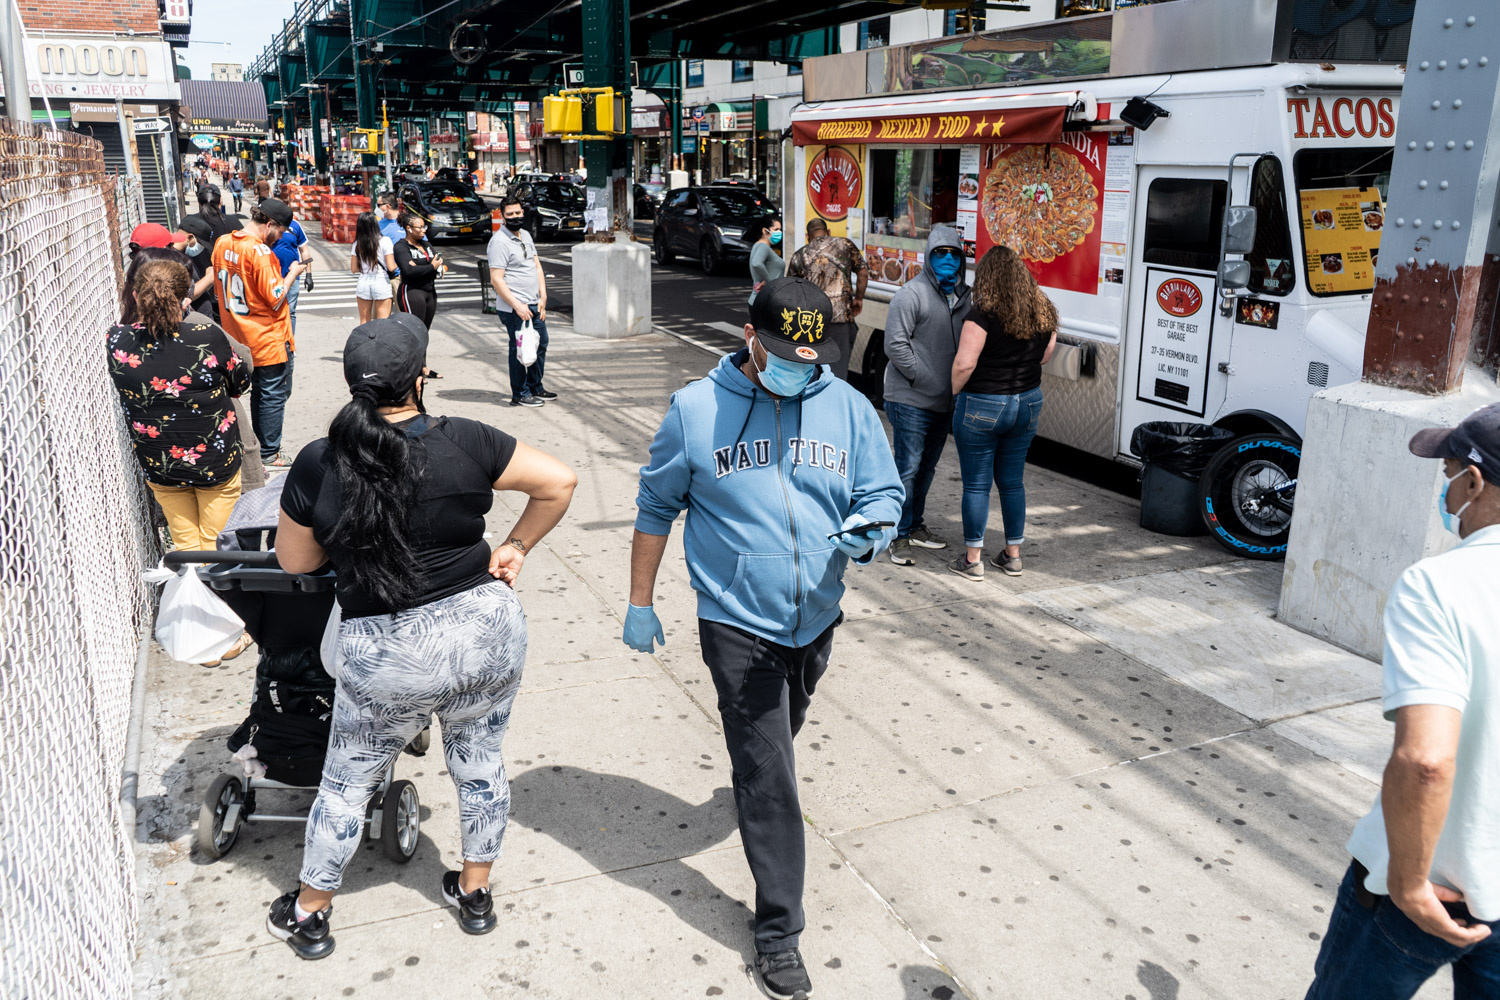 May 17, 2020: Waiting to order tacos from the famous Birria-Landia food truck at 78th Street and Roosevelt Avenue, Queens, New York. © Camilo José Vergara